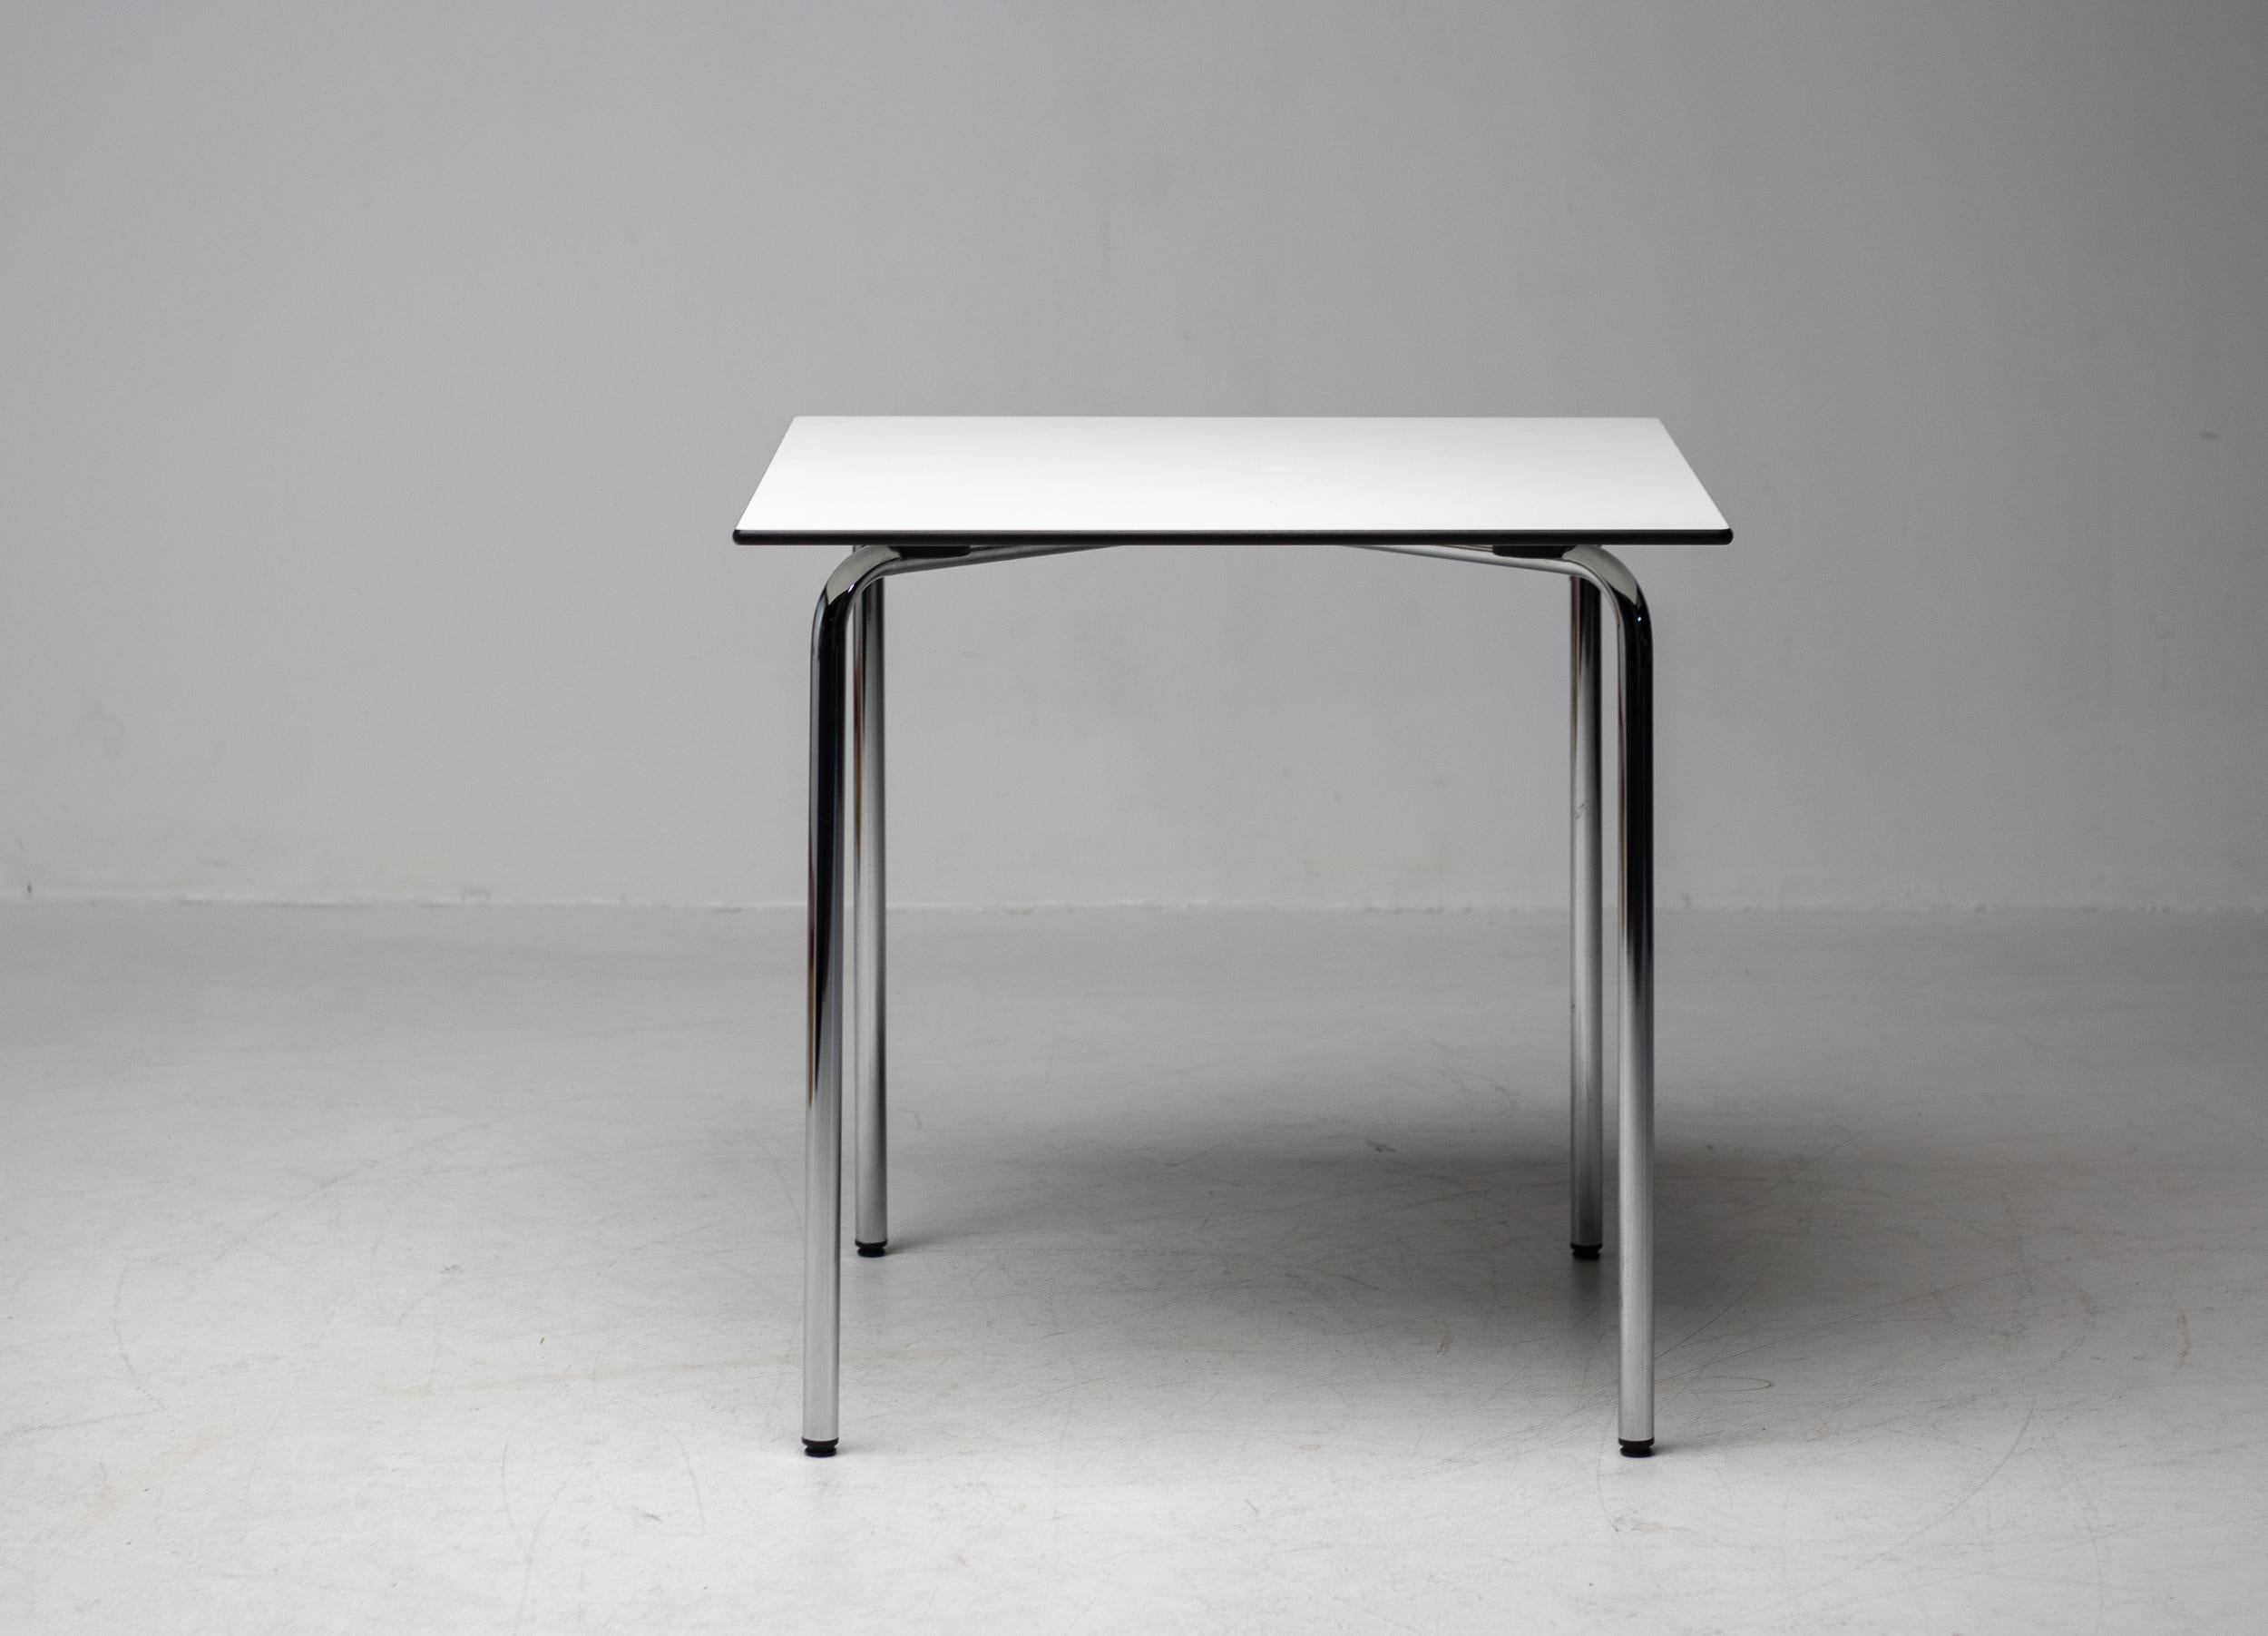 The HAL Table was designed by Jasper Morrison as a companion table for the HAL Chair.
The square table top is exceptionally robust. With a chrome-plated base, the table makes a perfect match for HAL Chair models. Materials; Table top: solid core